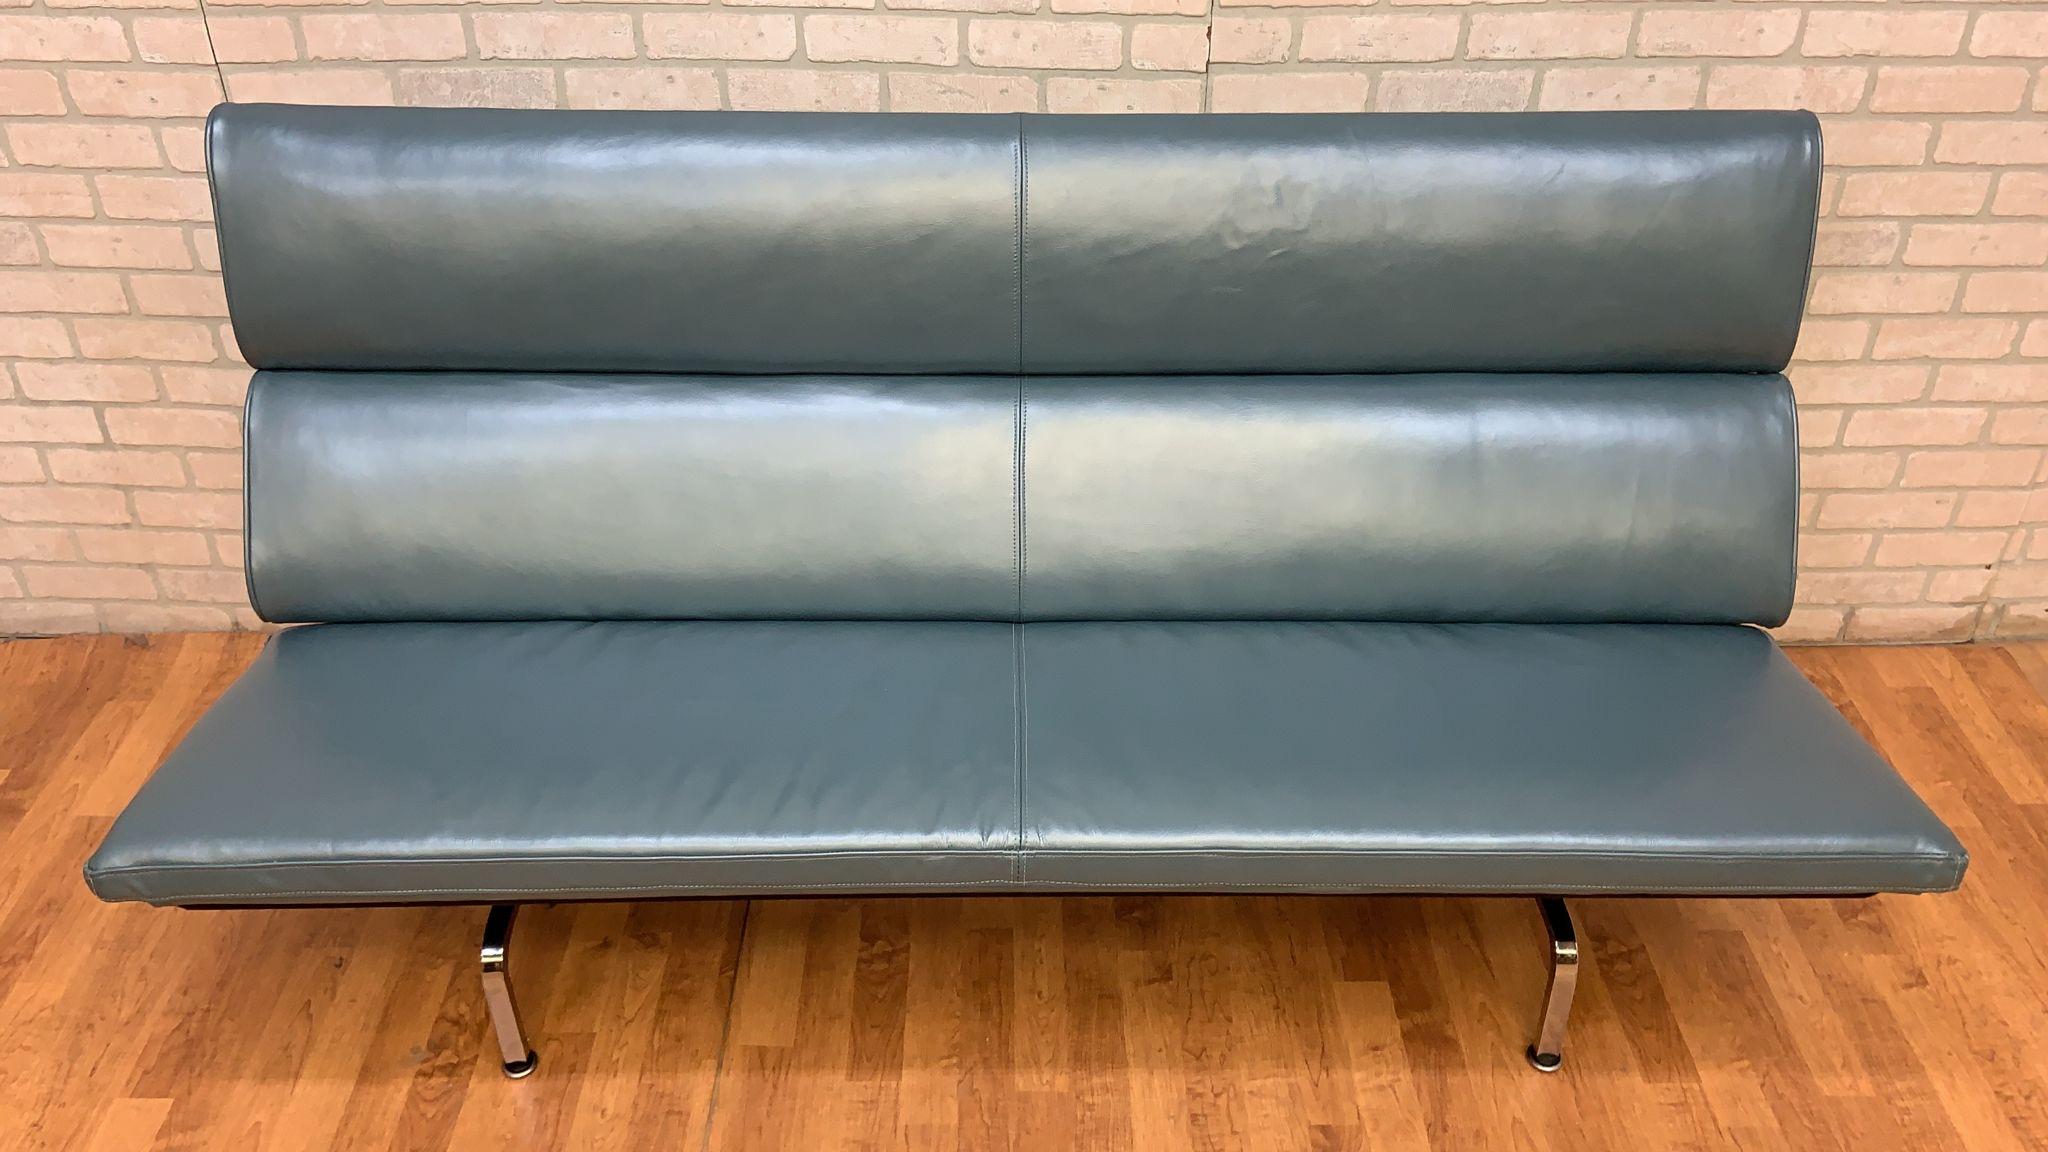 Vintage Compact Herman Miller Sofa Newly Upholstered in Metallic Teal Leather In Good Condition For Sale In Chicago, IL